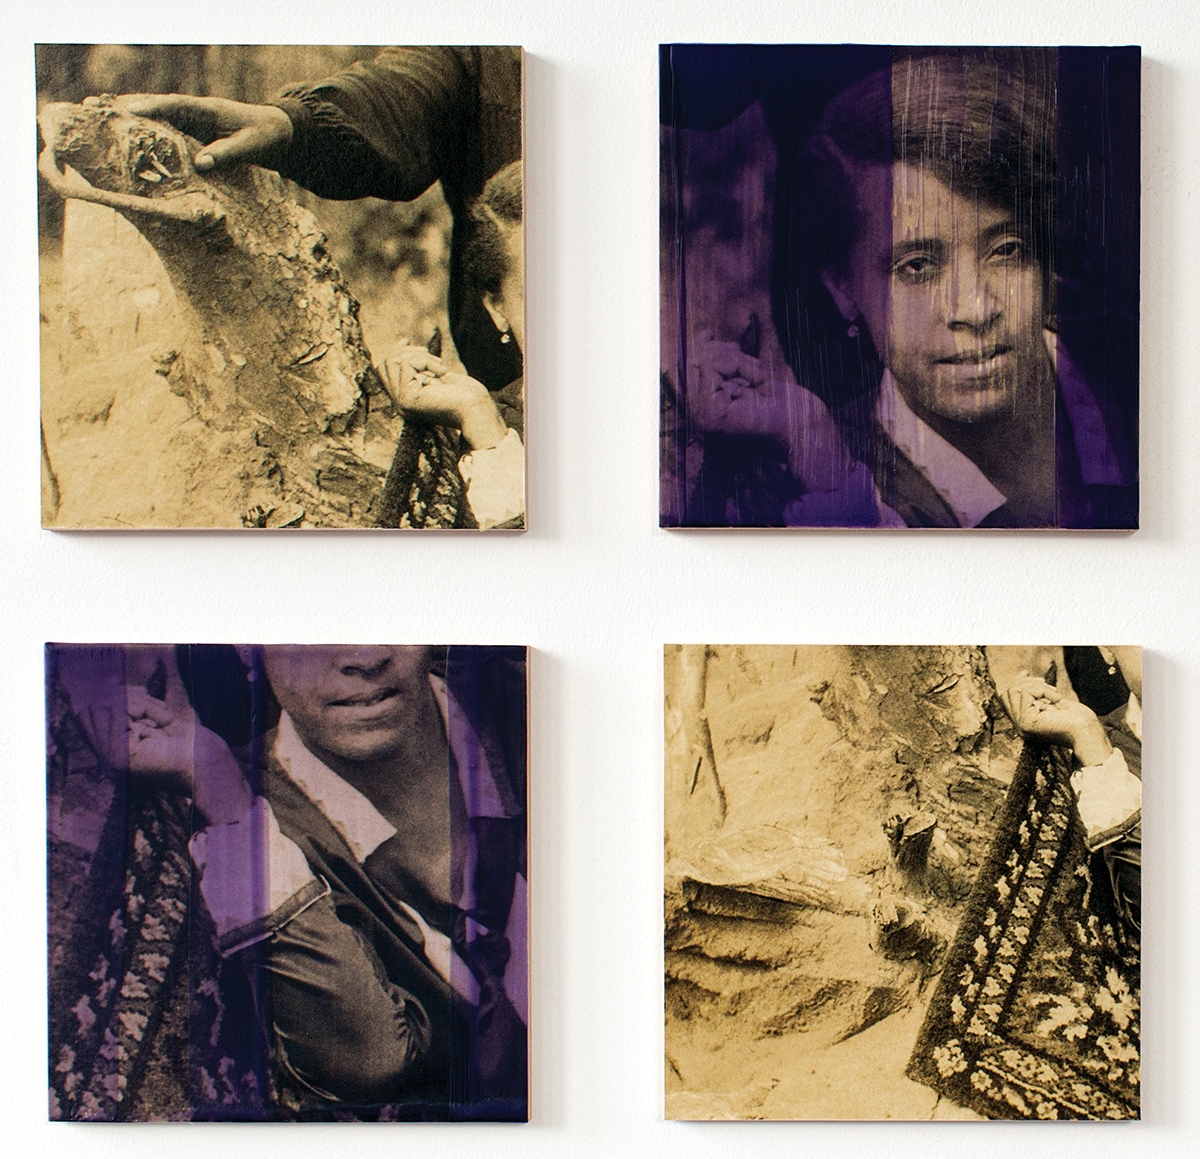 A photograph of two people leaning against a rock is segmented into four squares arranged in a grid with two squares colored by a dark purple wash.